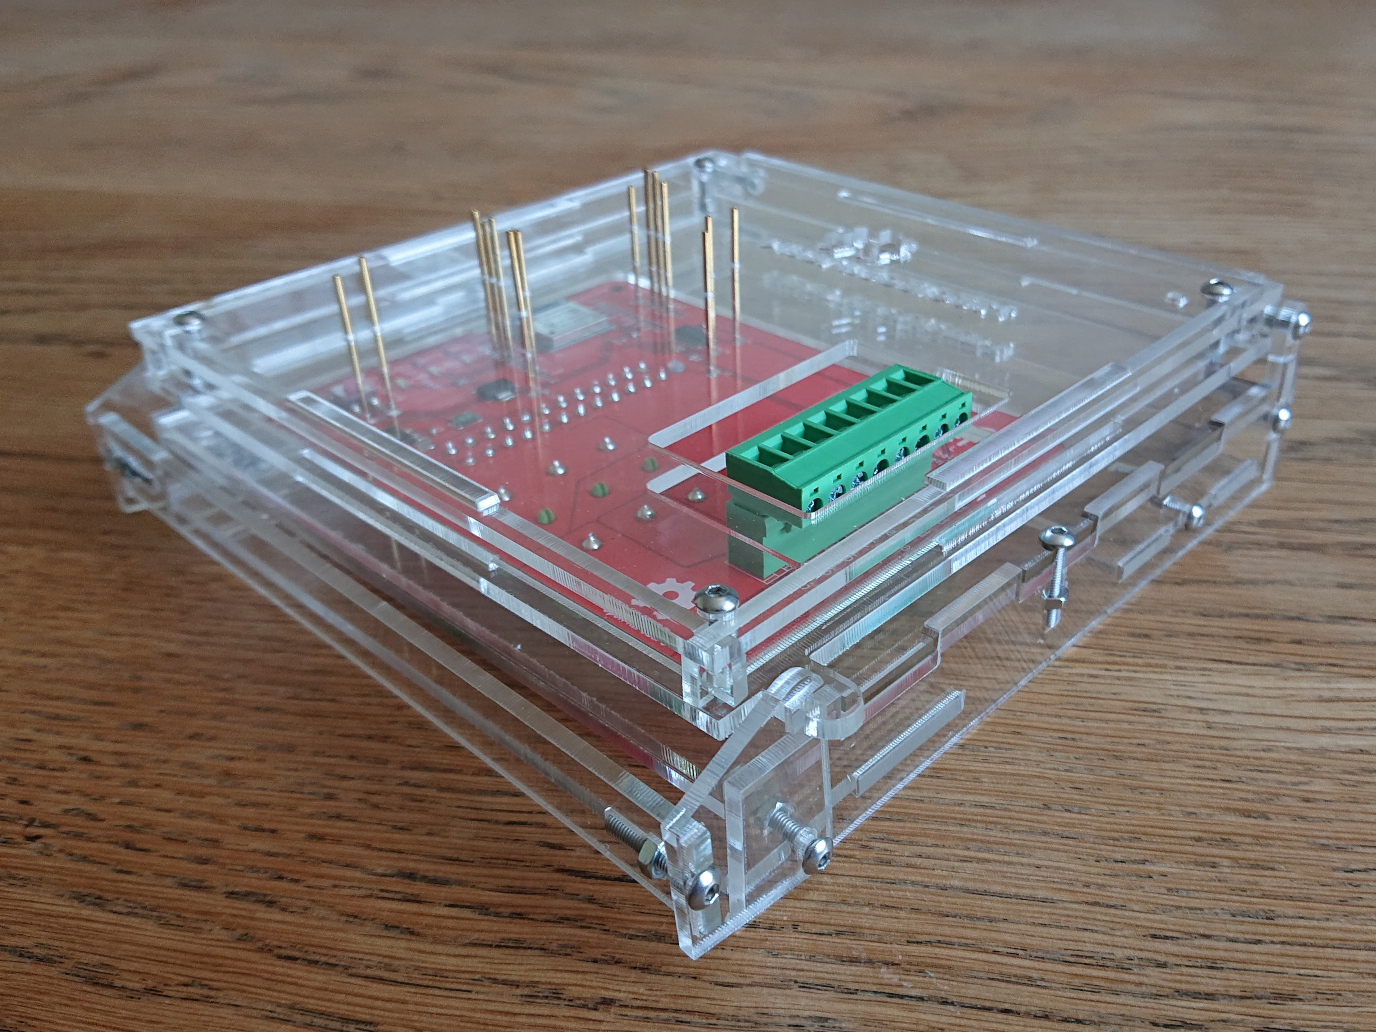 A transparent acrylic box whose lid is pierced by a collection of thin, gold pins which line up with key test points on the PCB which is held in place inside the box